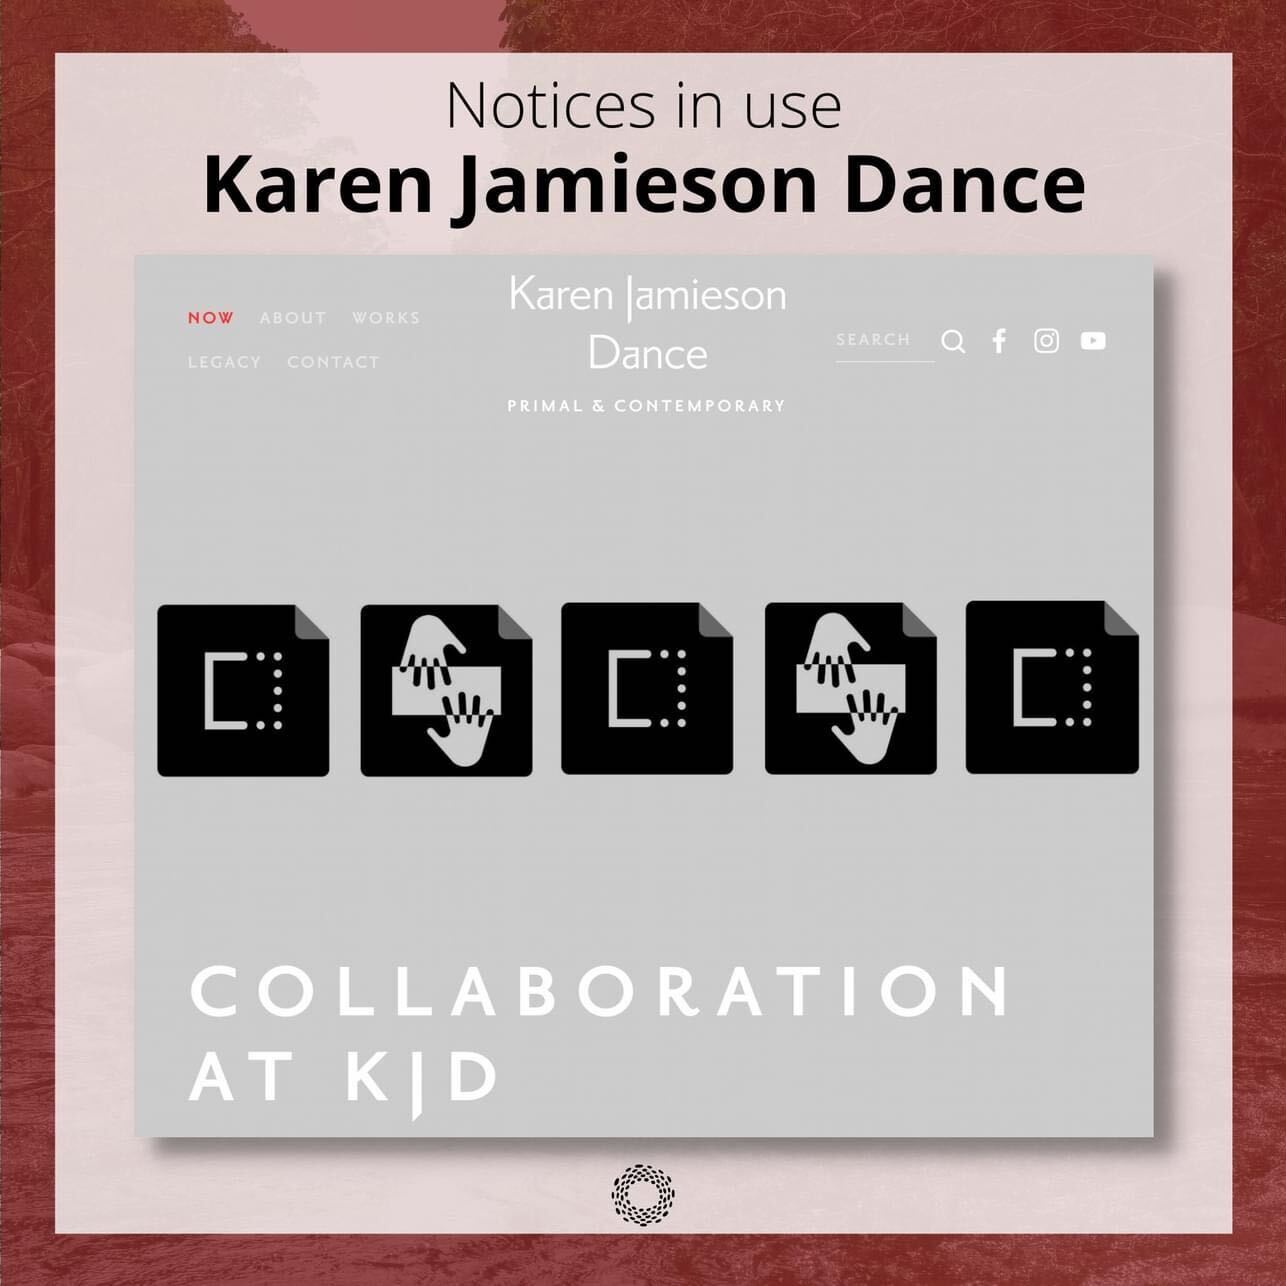 On a decorative red background, text: “Notices in use. Karen Jamieson Dance.” Screenshot of the Karen Jamieson Dance website with the title “Collaboration at KJD.”